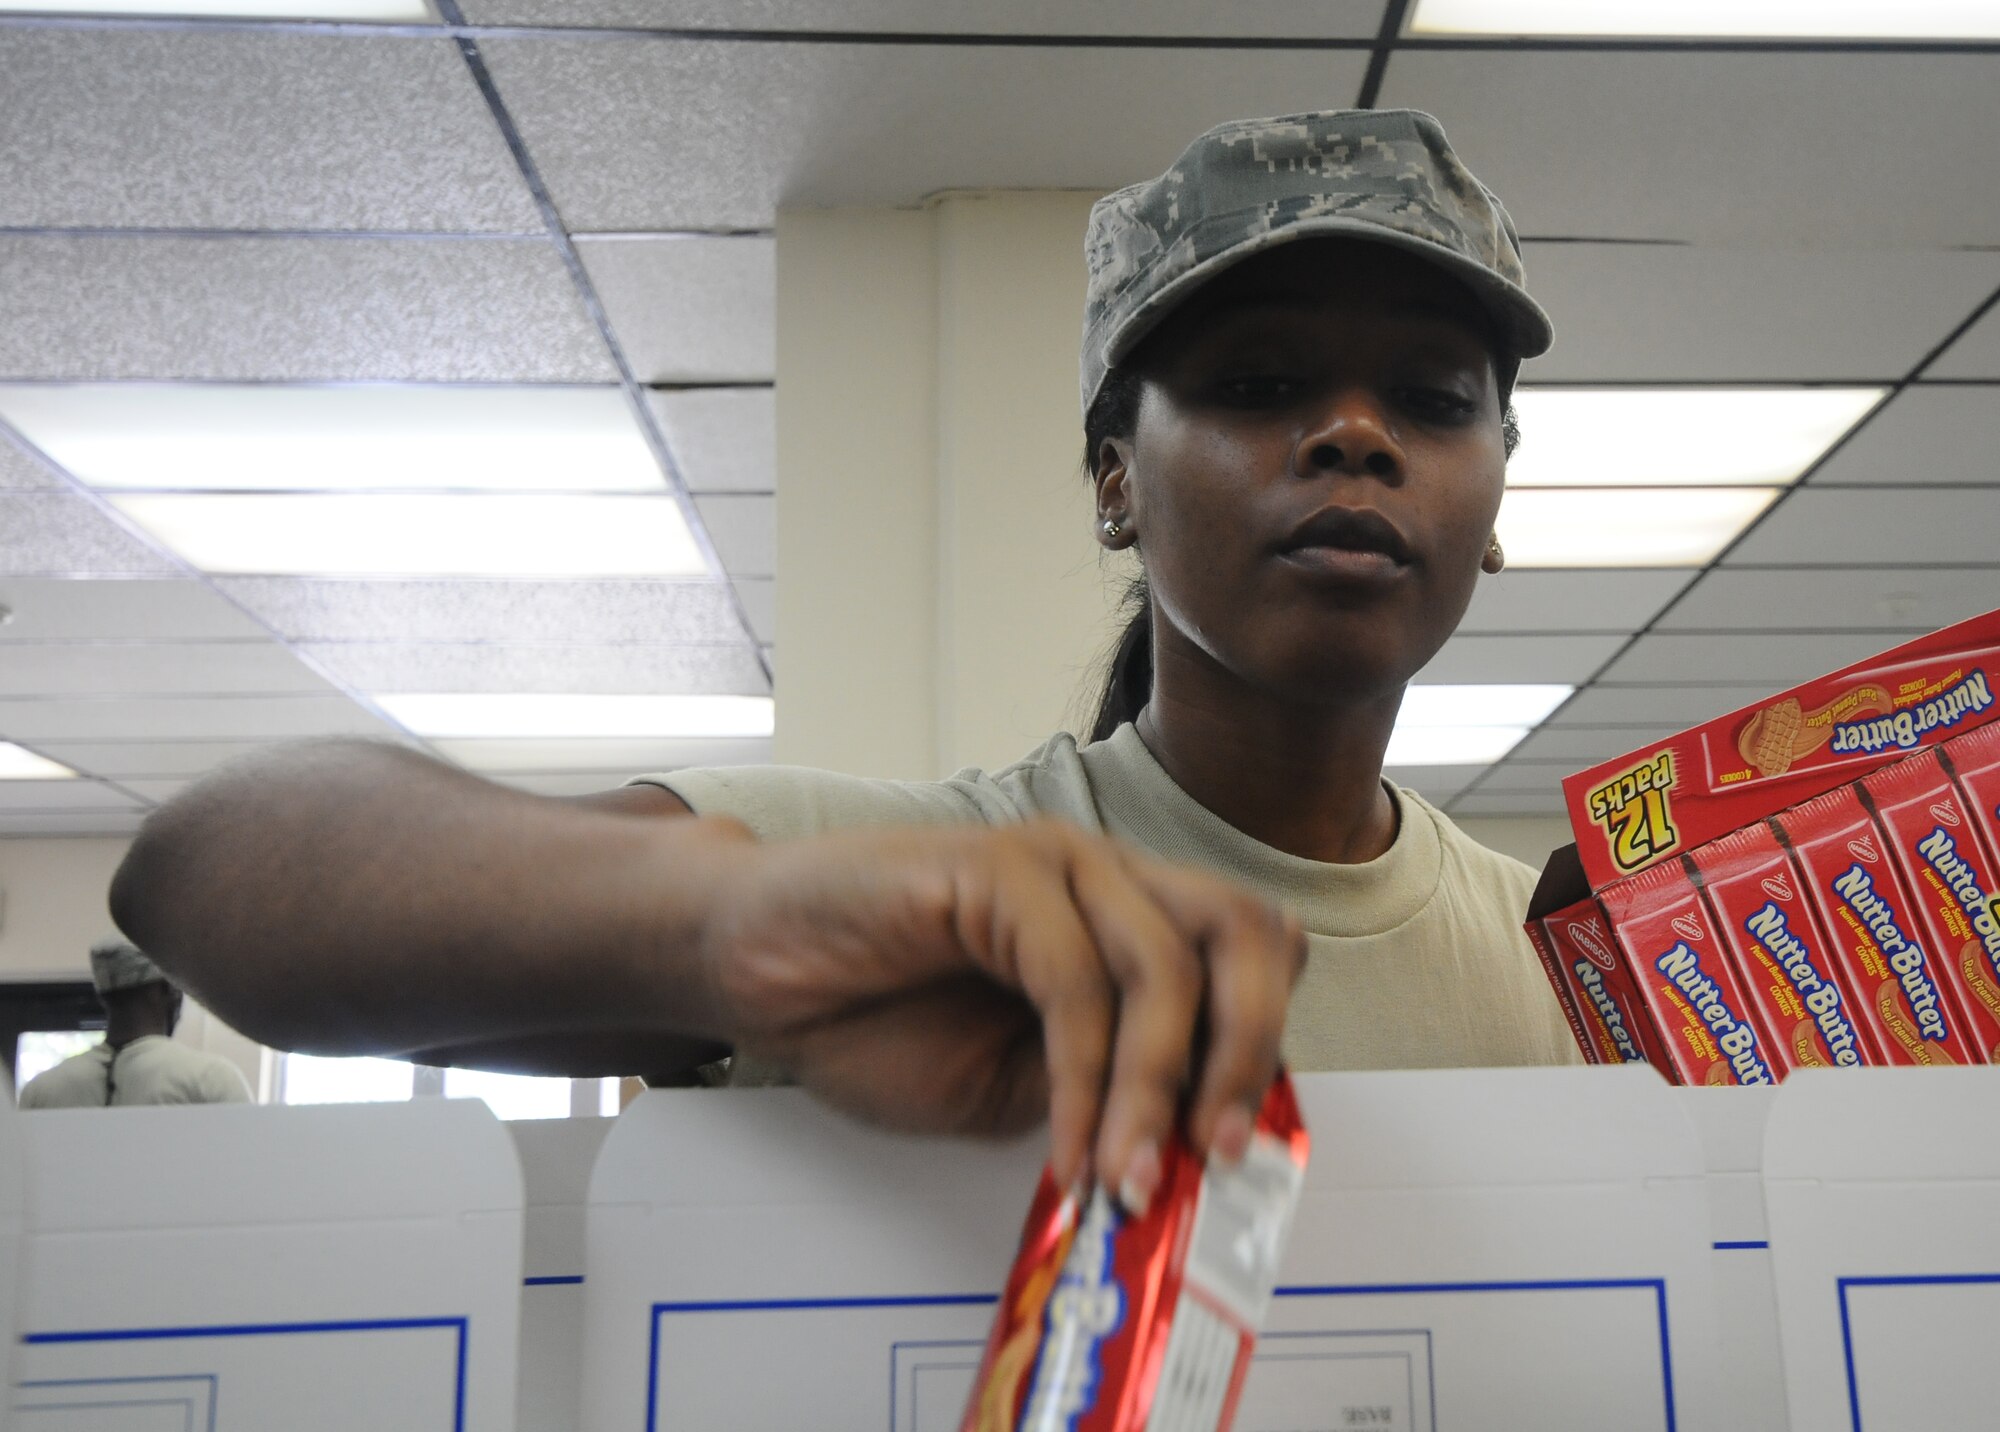 Senior Airman Angel Lewis, 36th Force Support Squadron services journeyman deployed from the Georgia Air National Guard, prepares boxed lunches by distributing cookies June 10, 2013, on Andersen Air Force Base, Guam. During major events, like exercises that include allied nations, the 36th FSS Skyline Flight Kitchen team’s workload can spike with upward of 1,300 meals going out in one day. (U.S. Air Force photo by Airman 1st Class Emily A. Bradley/Released)